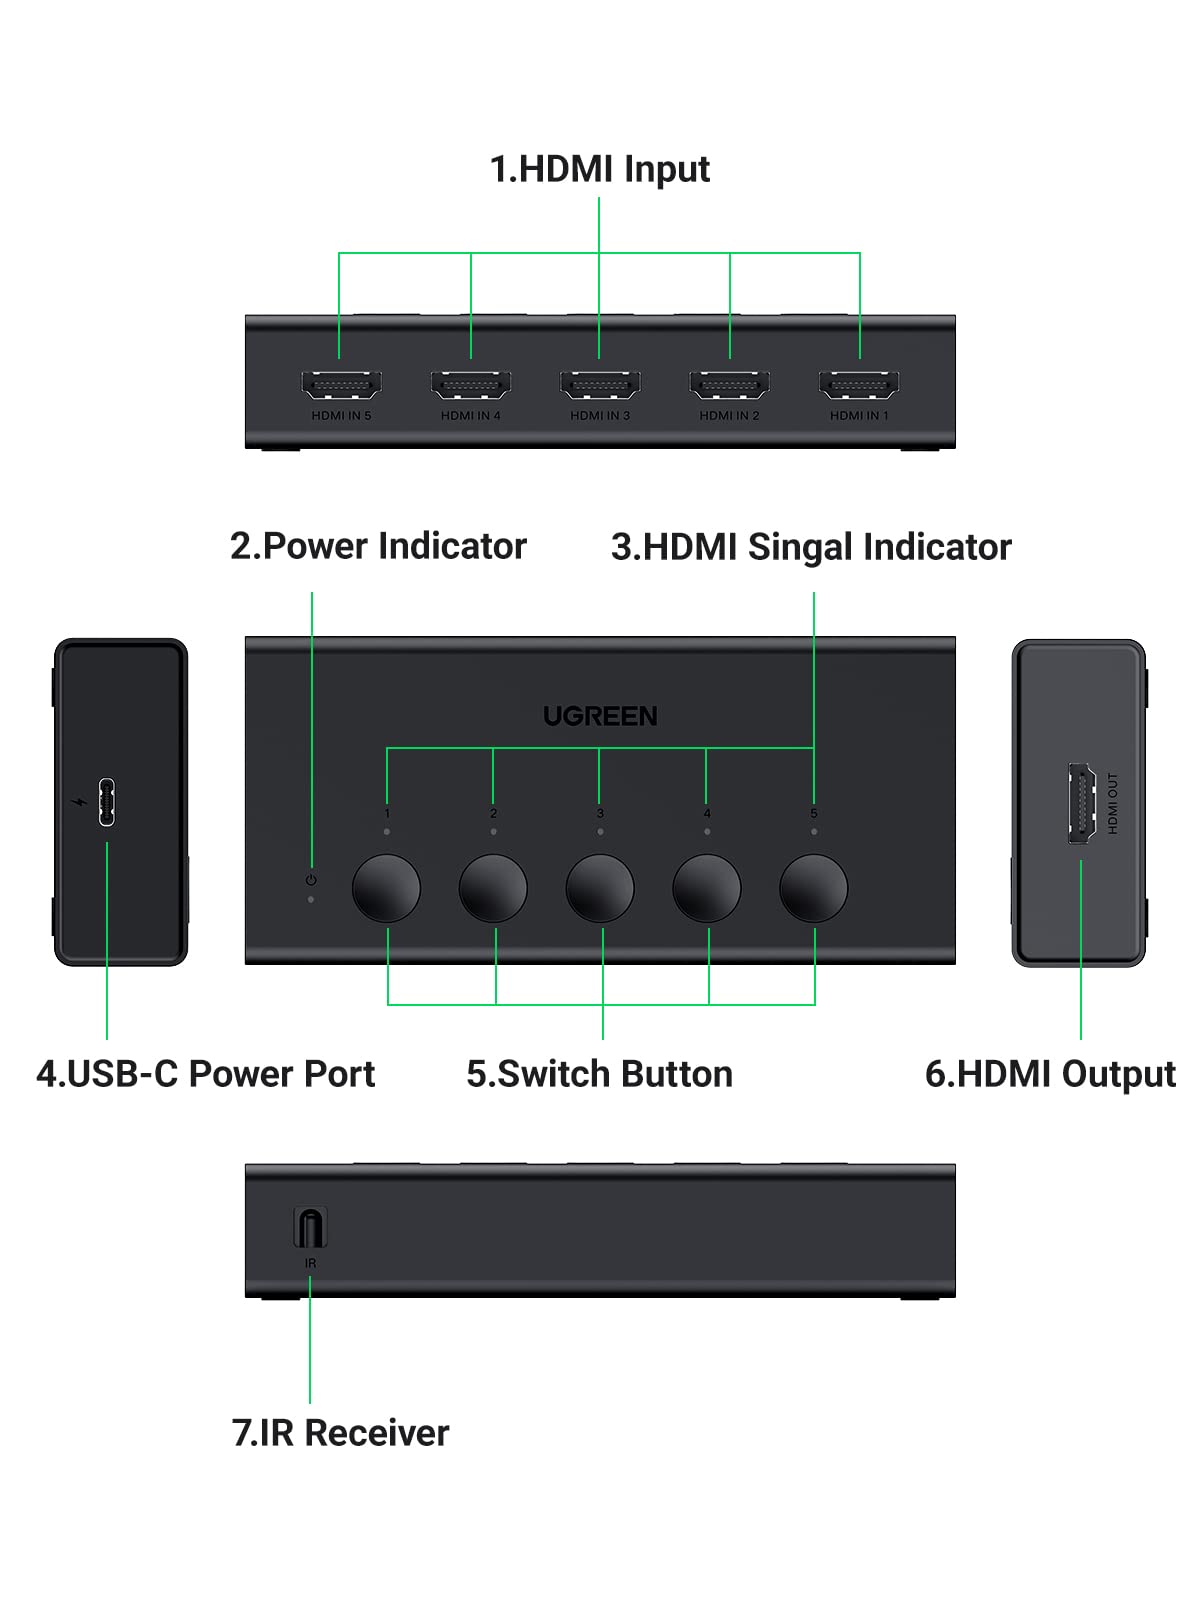 UGREEN HDMI Switch 5 in 1 Out 4K@60Hz, HDMI Switcher 4K HDR with IR Remote, 5 Port HDMI 2.0 Switcher Support 3D Dolby Vision Atmos CEC HDCP2.2, Selector Box Compatible with PS5/4/3 Xbox Switch Roku TV